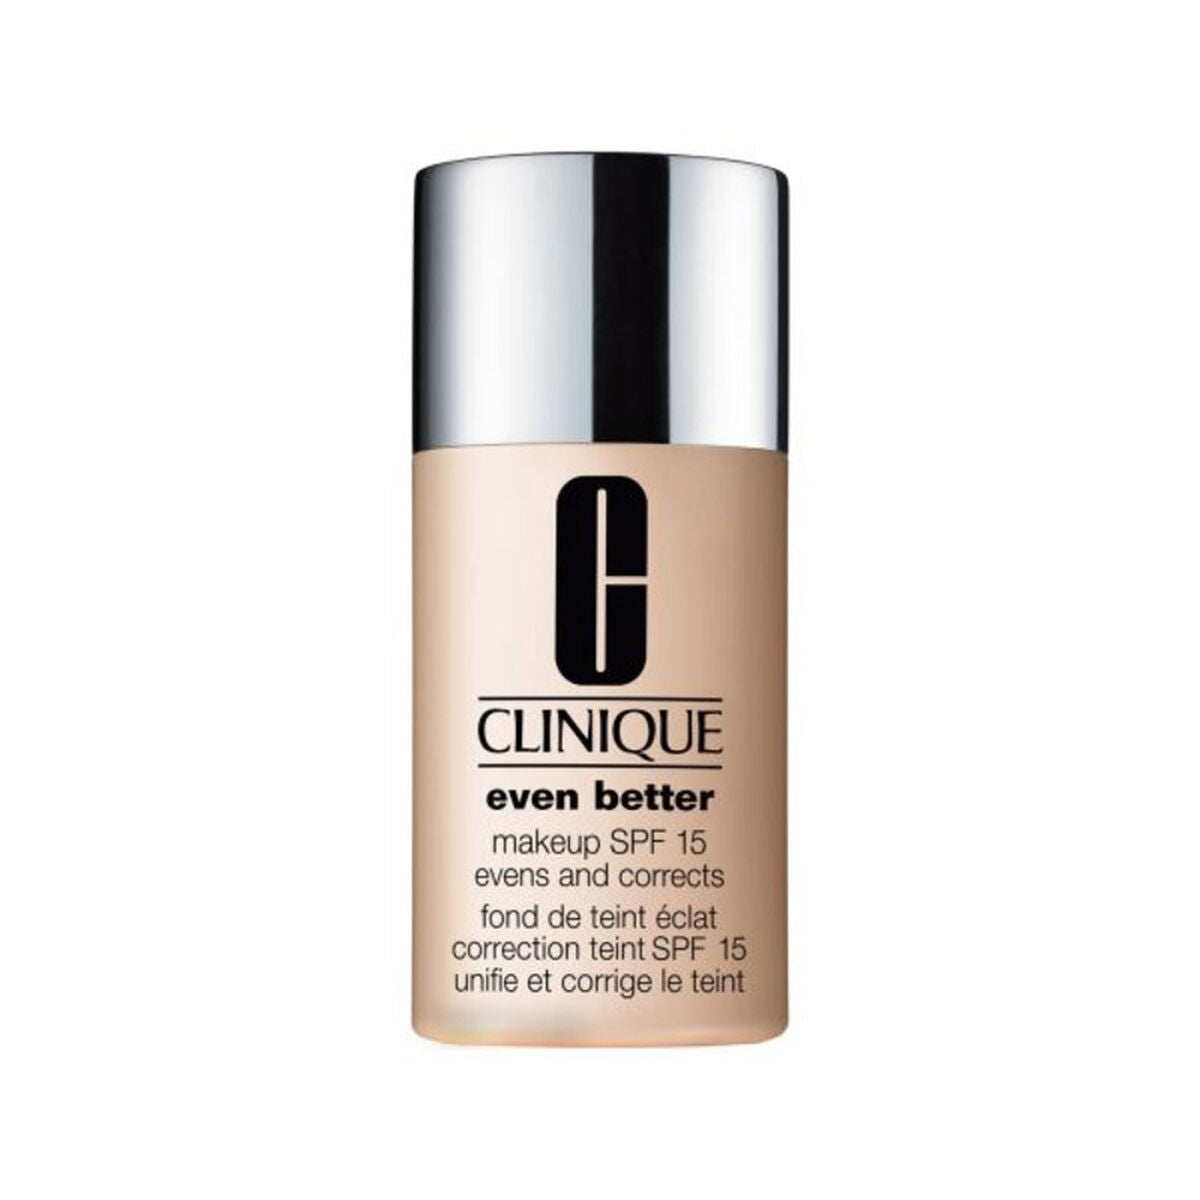 Anti-Brown Spot Make Up Even Better Clinique 020714324681 (30 ml) | Clinique | Aylal Beauty